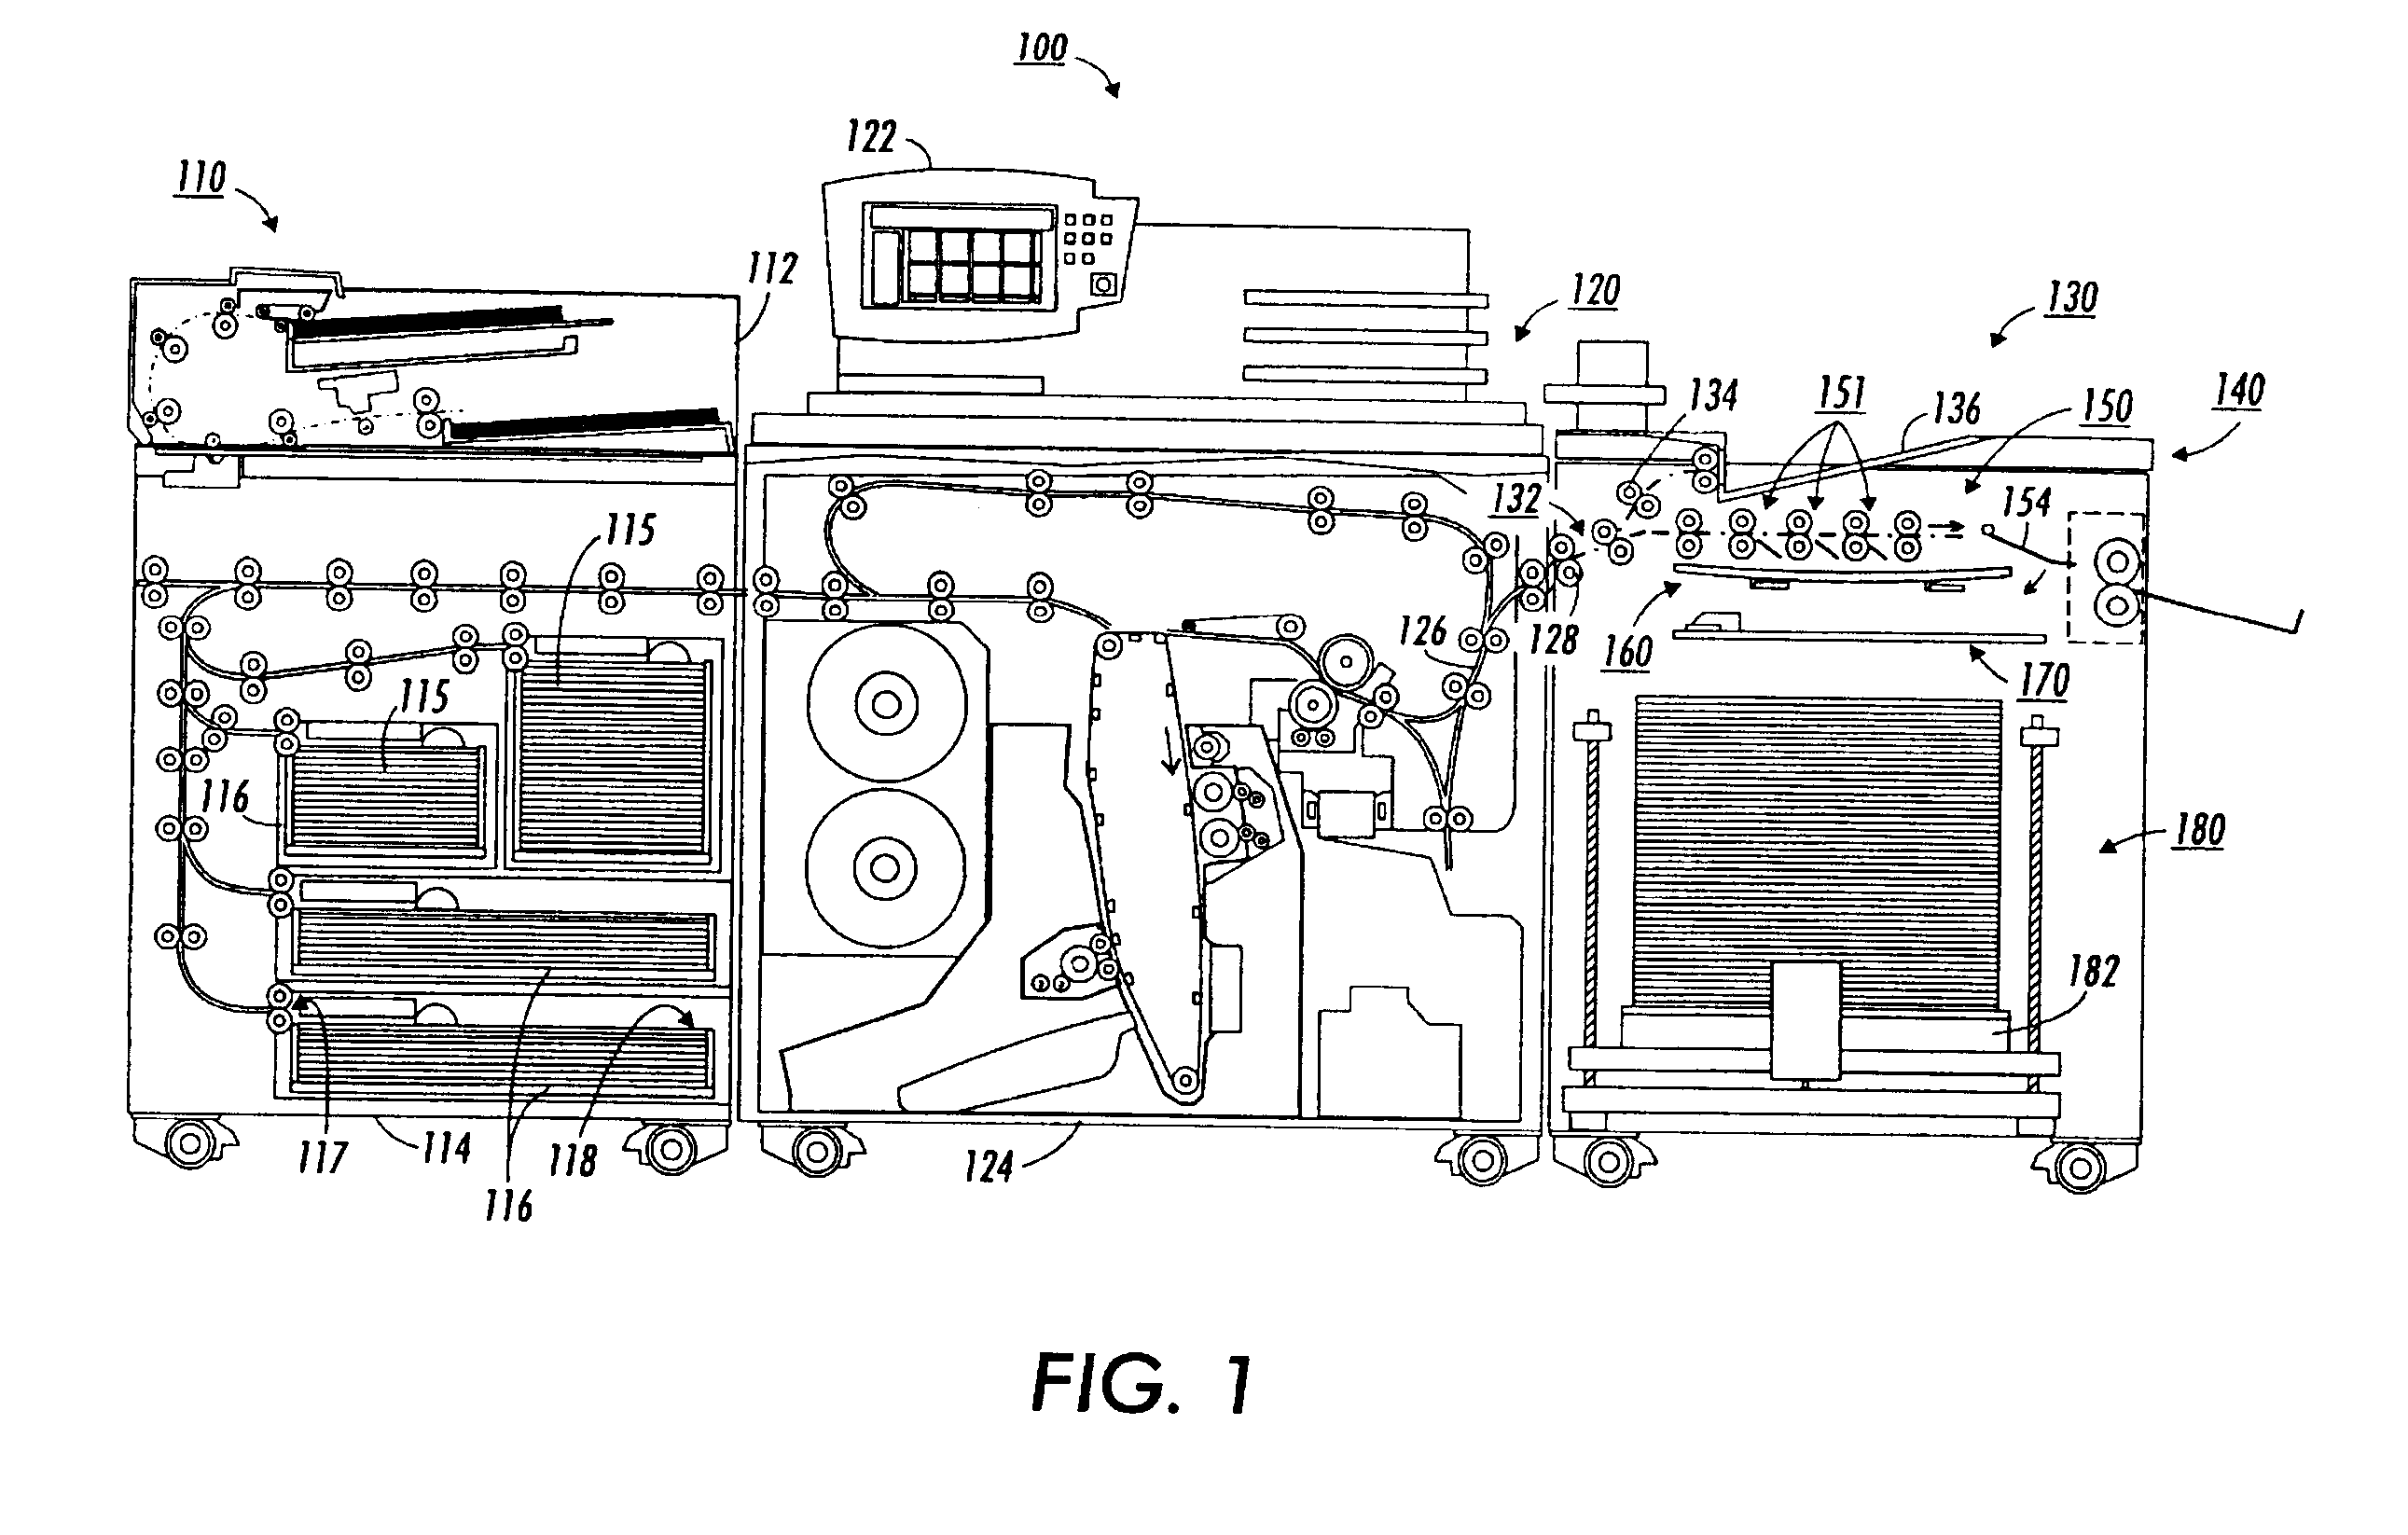 Systems and methods for trail edge paper suppression for high-speed finishing applications